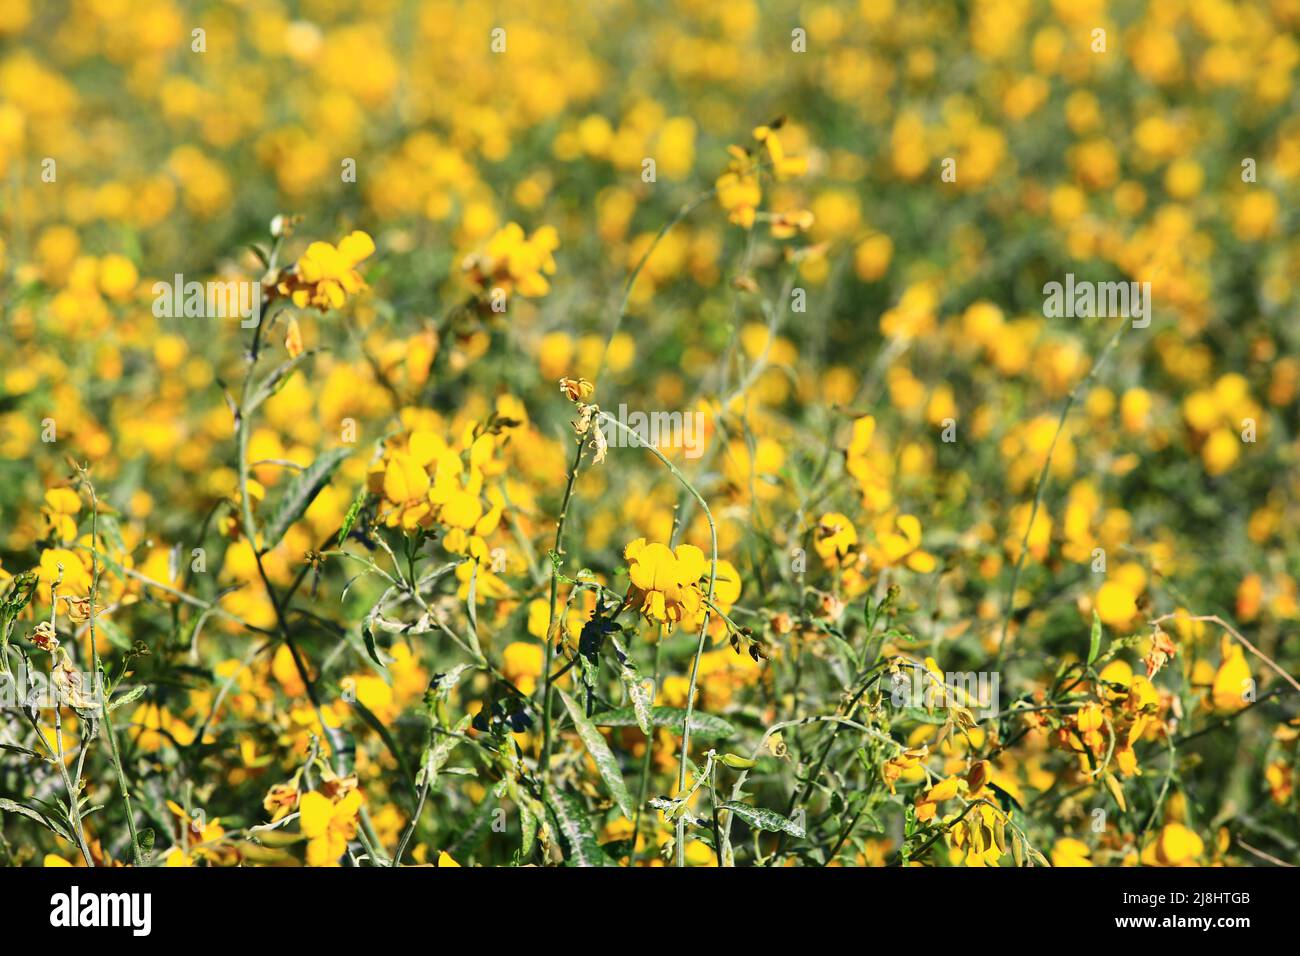 beautiful blooming flowers of Sun Hemp,close-up of yellow flowers blooming on the field at a sunny day Stock Photo